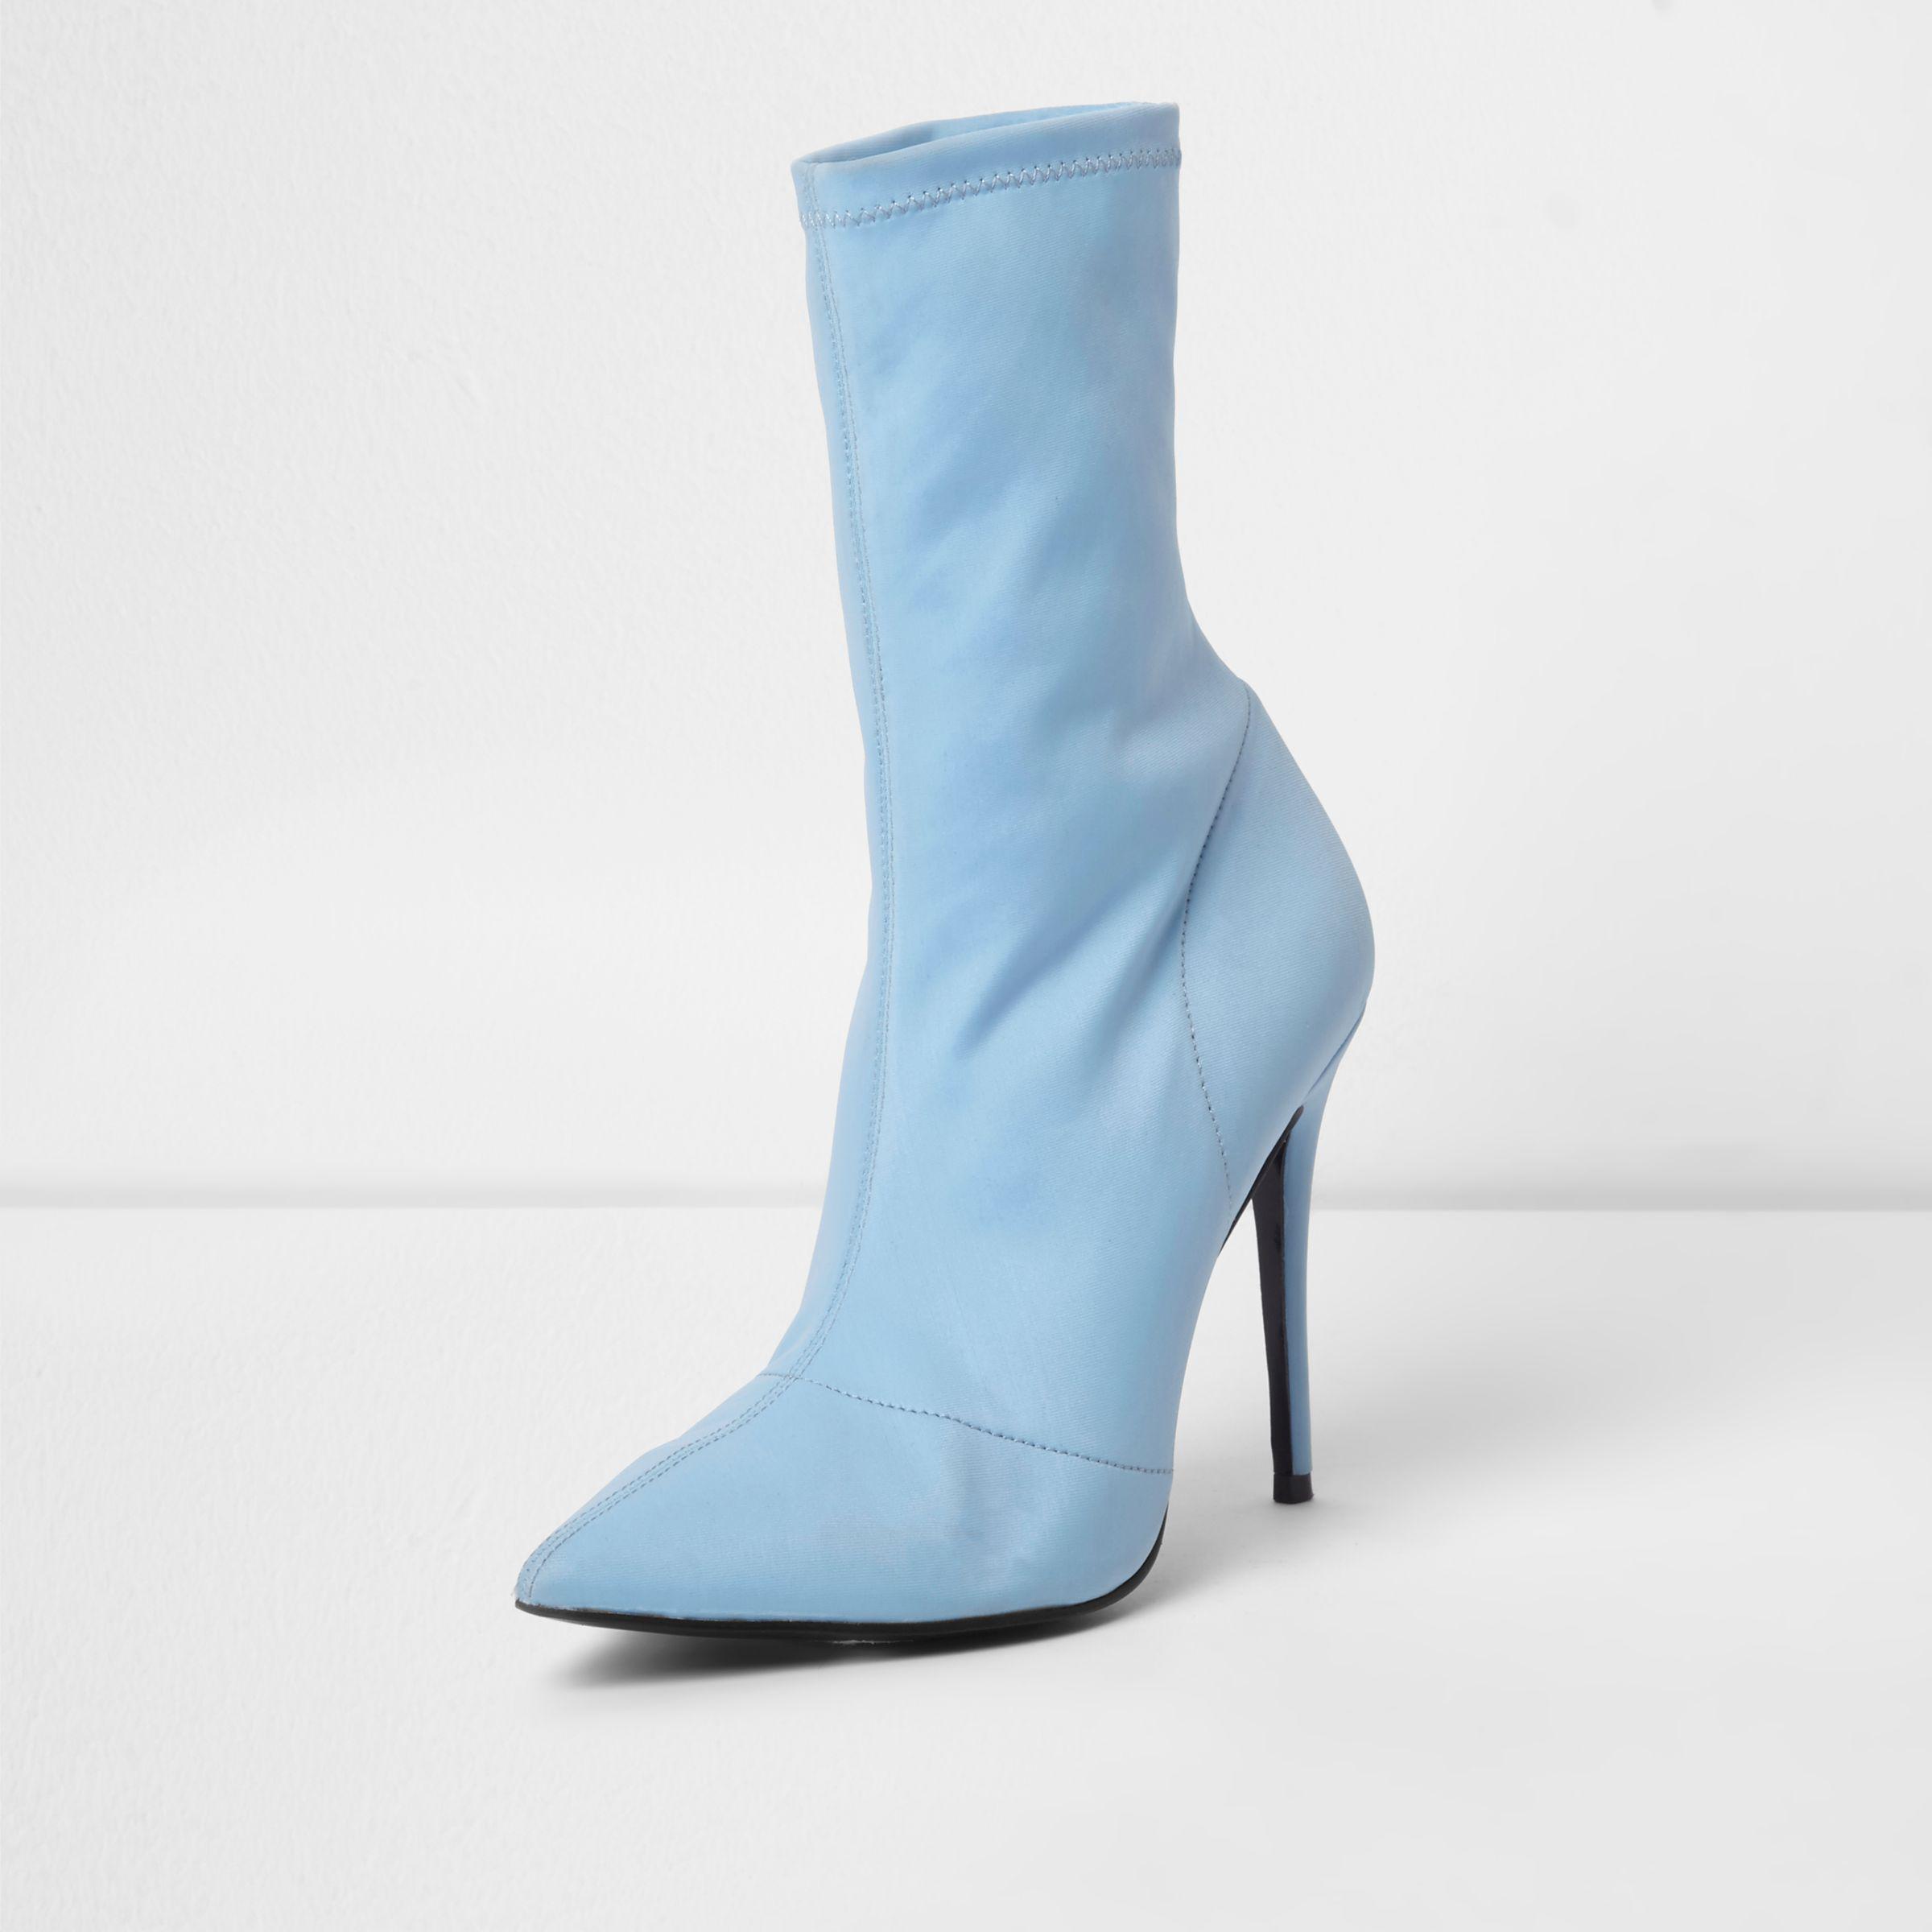 River Island Suede Light Blue Pointed Toe Stiletto Sock Boots Light Blue  Pointed Toe Stiletto Sock Boots - Lyst